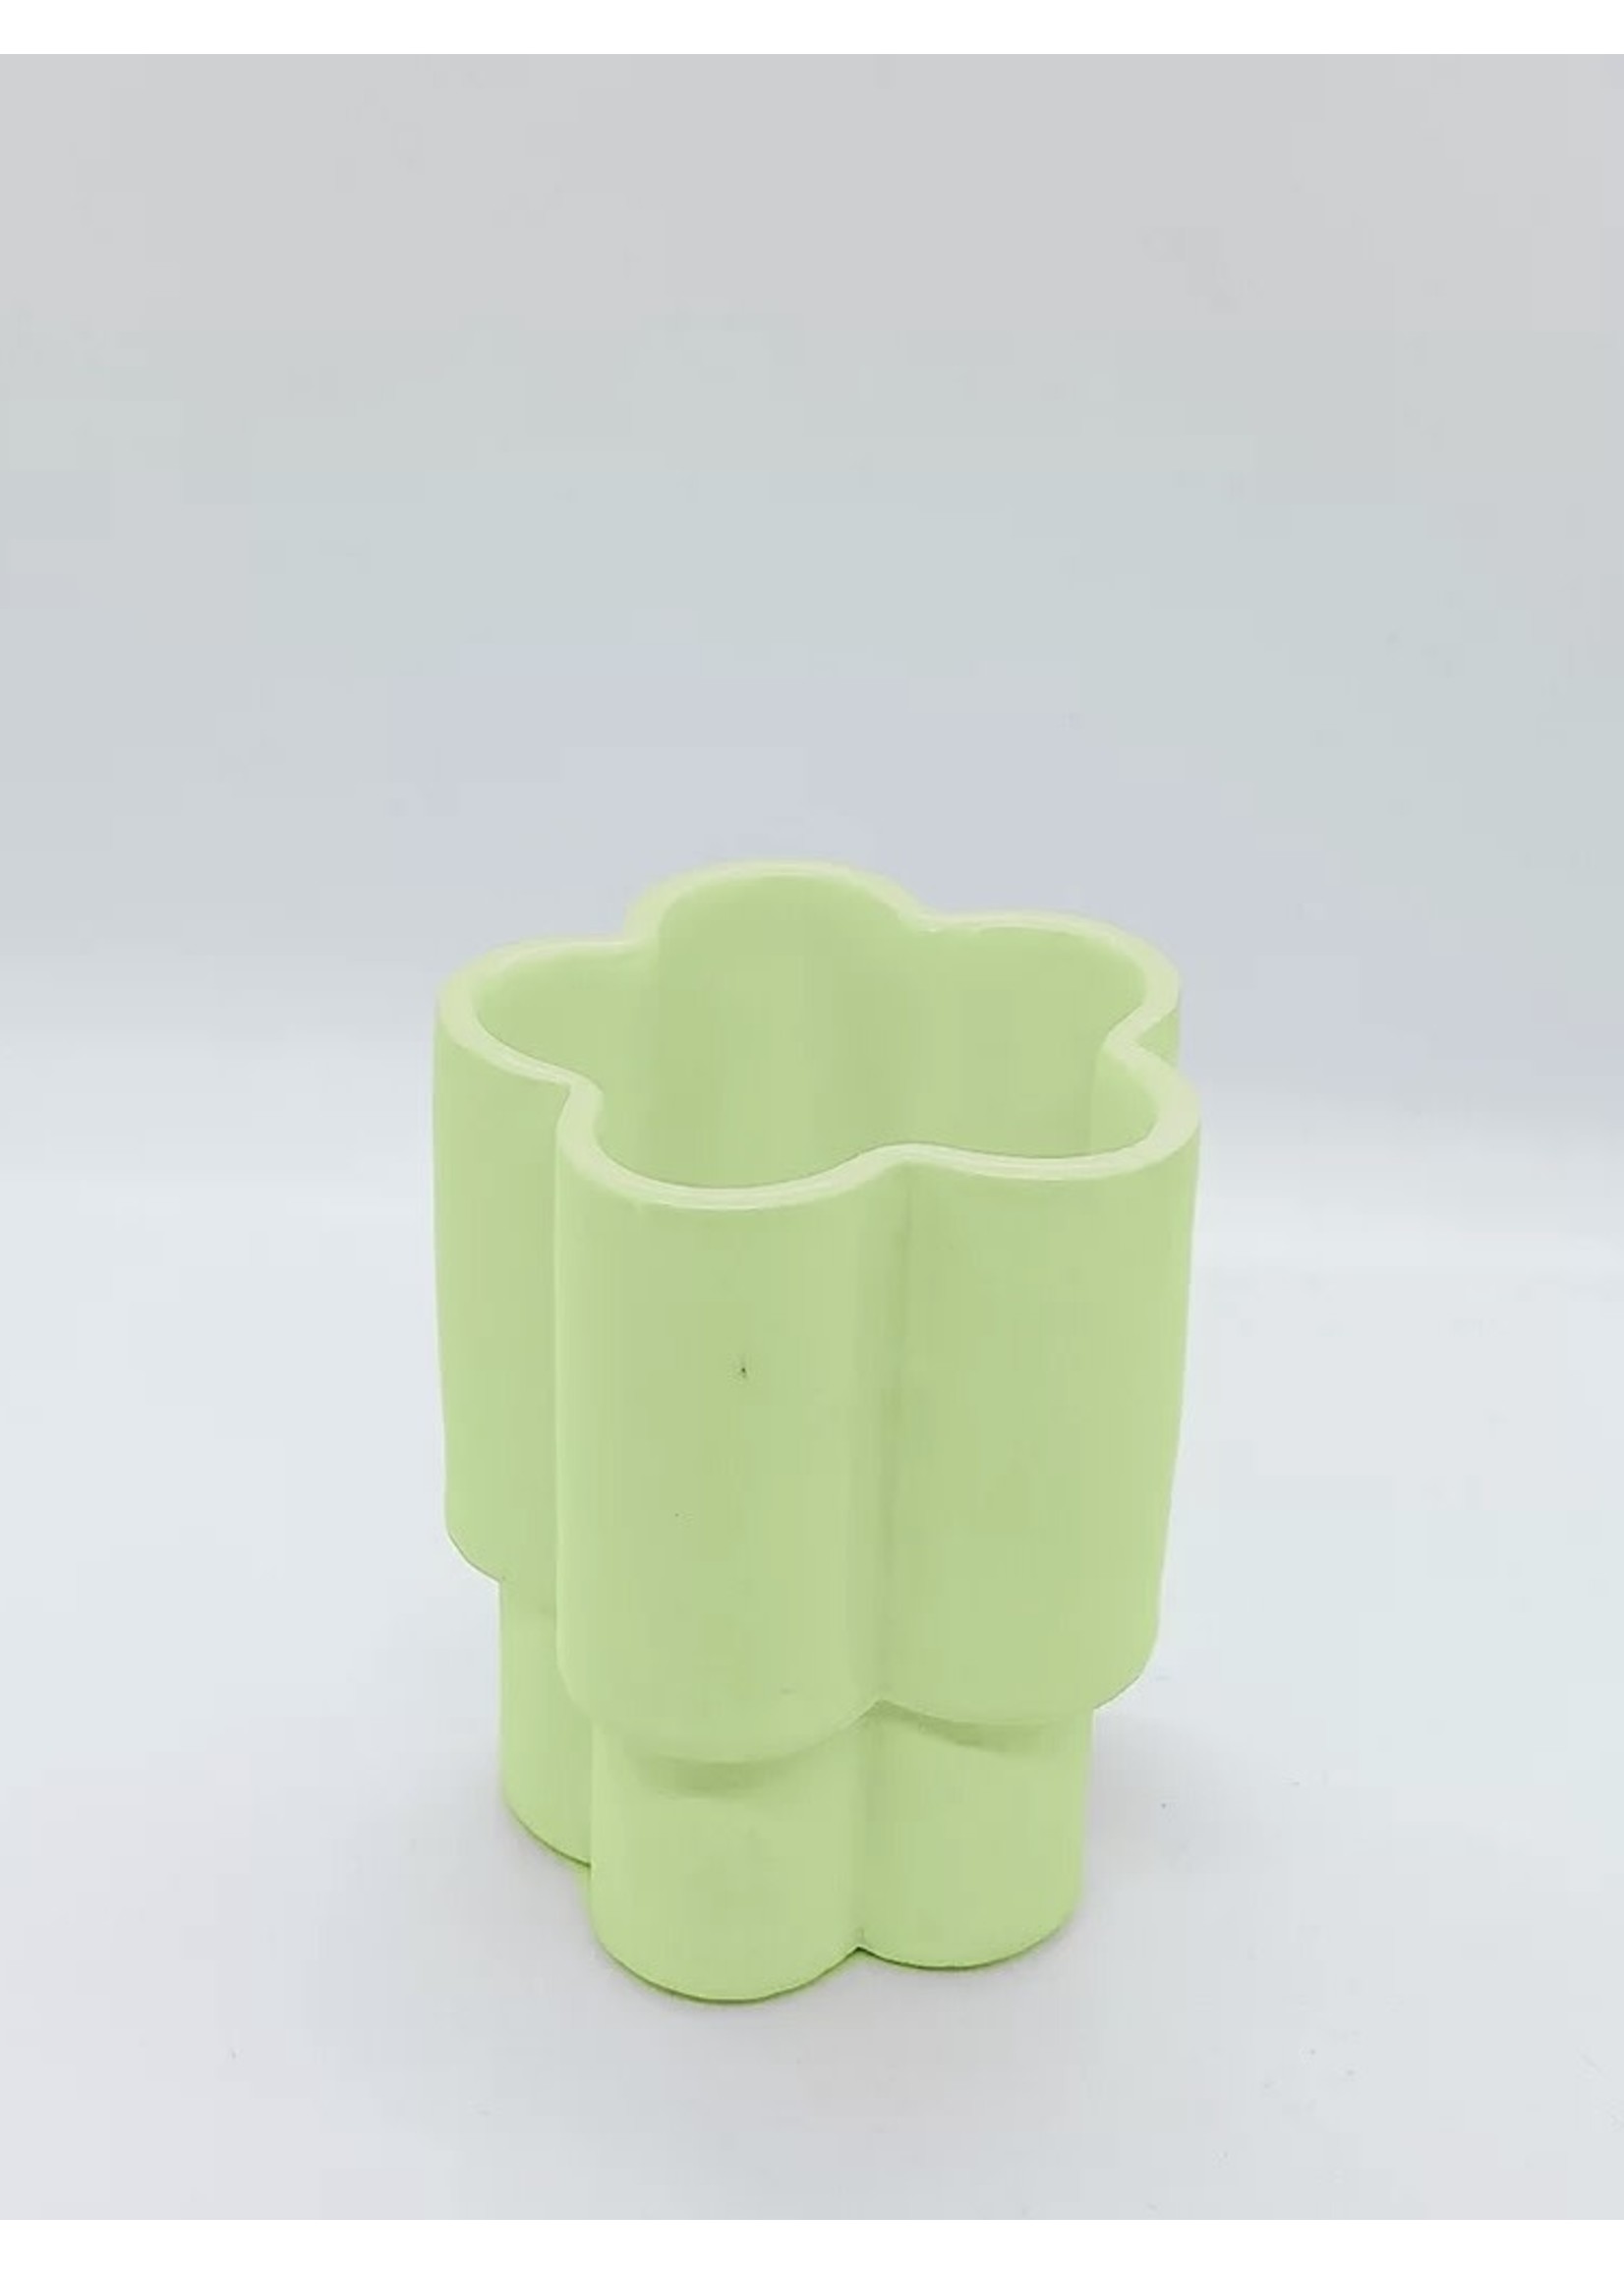 High Noon Ceramic Cup "Fleur" by High Noon